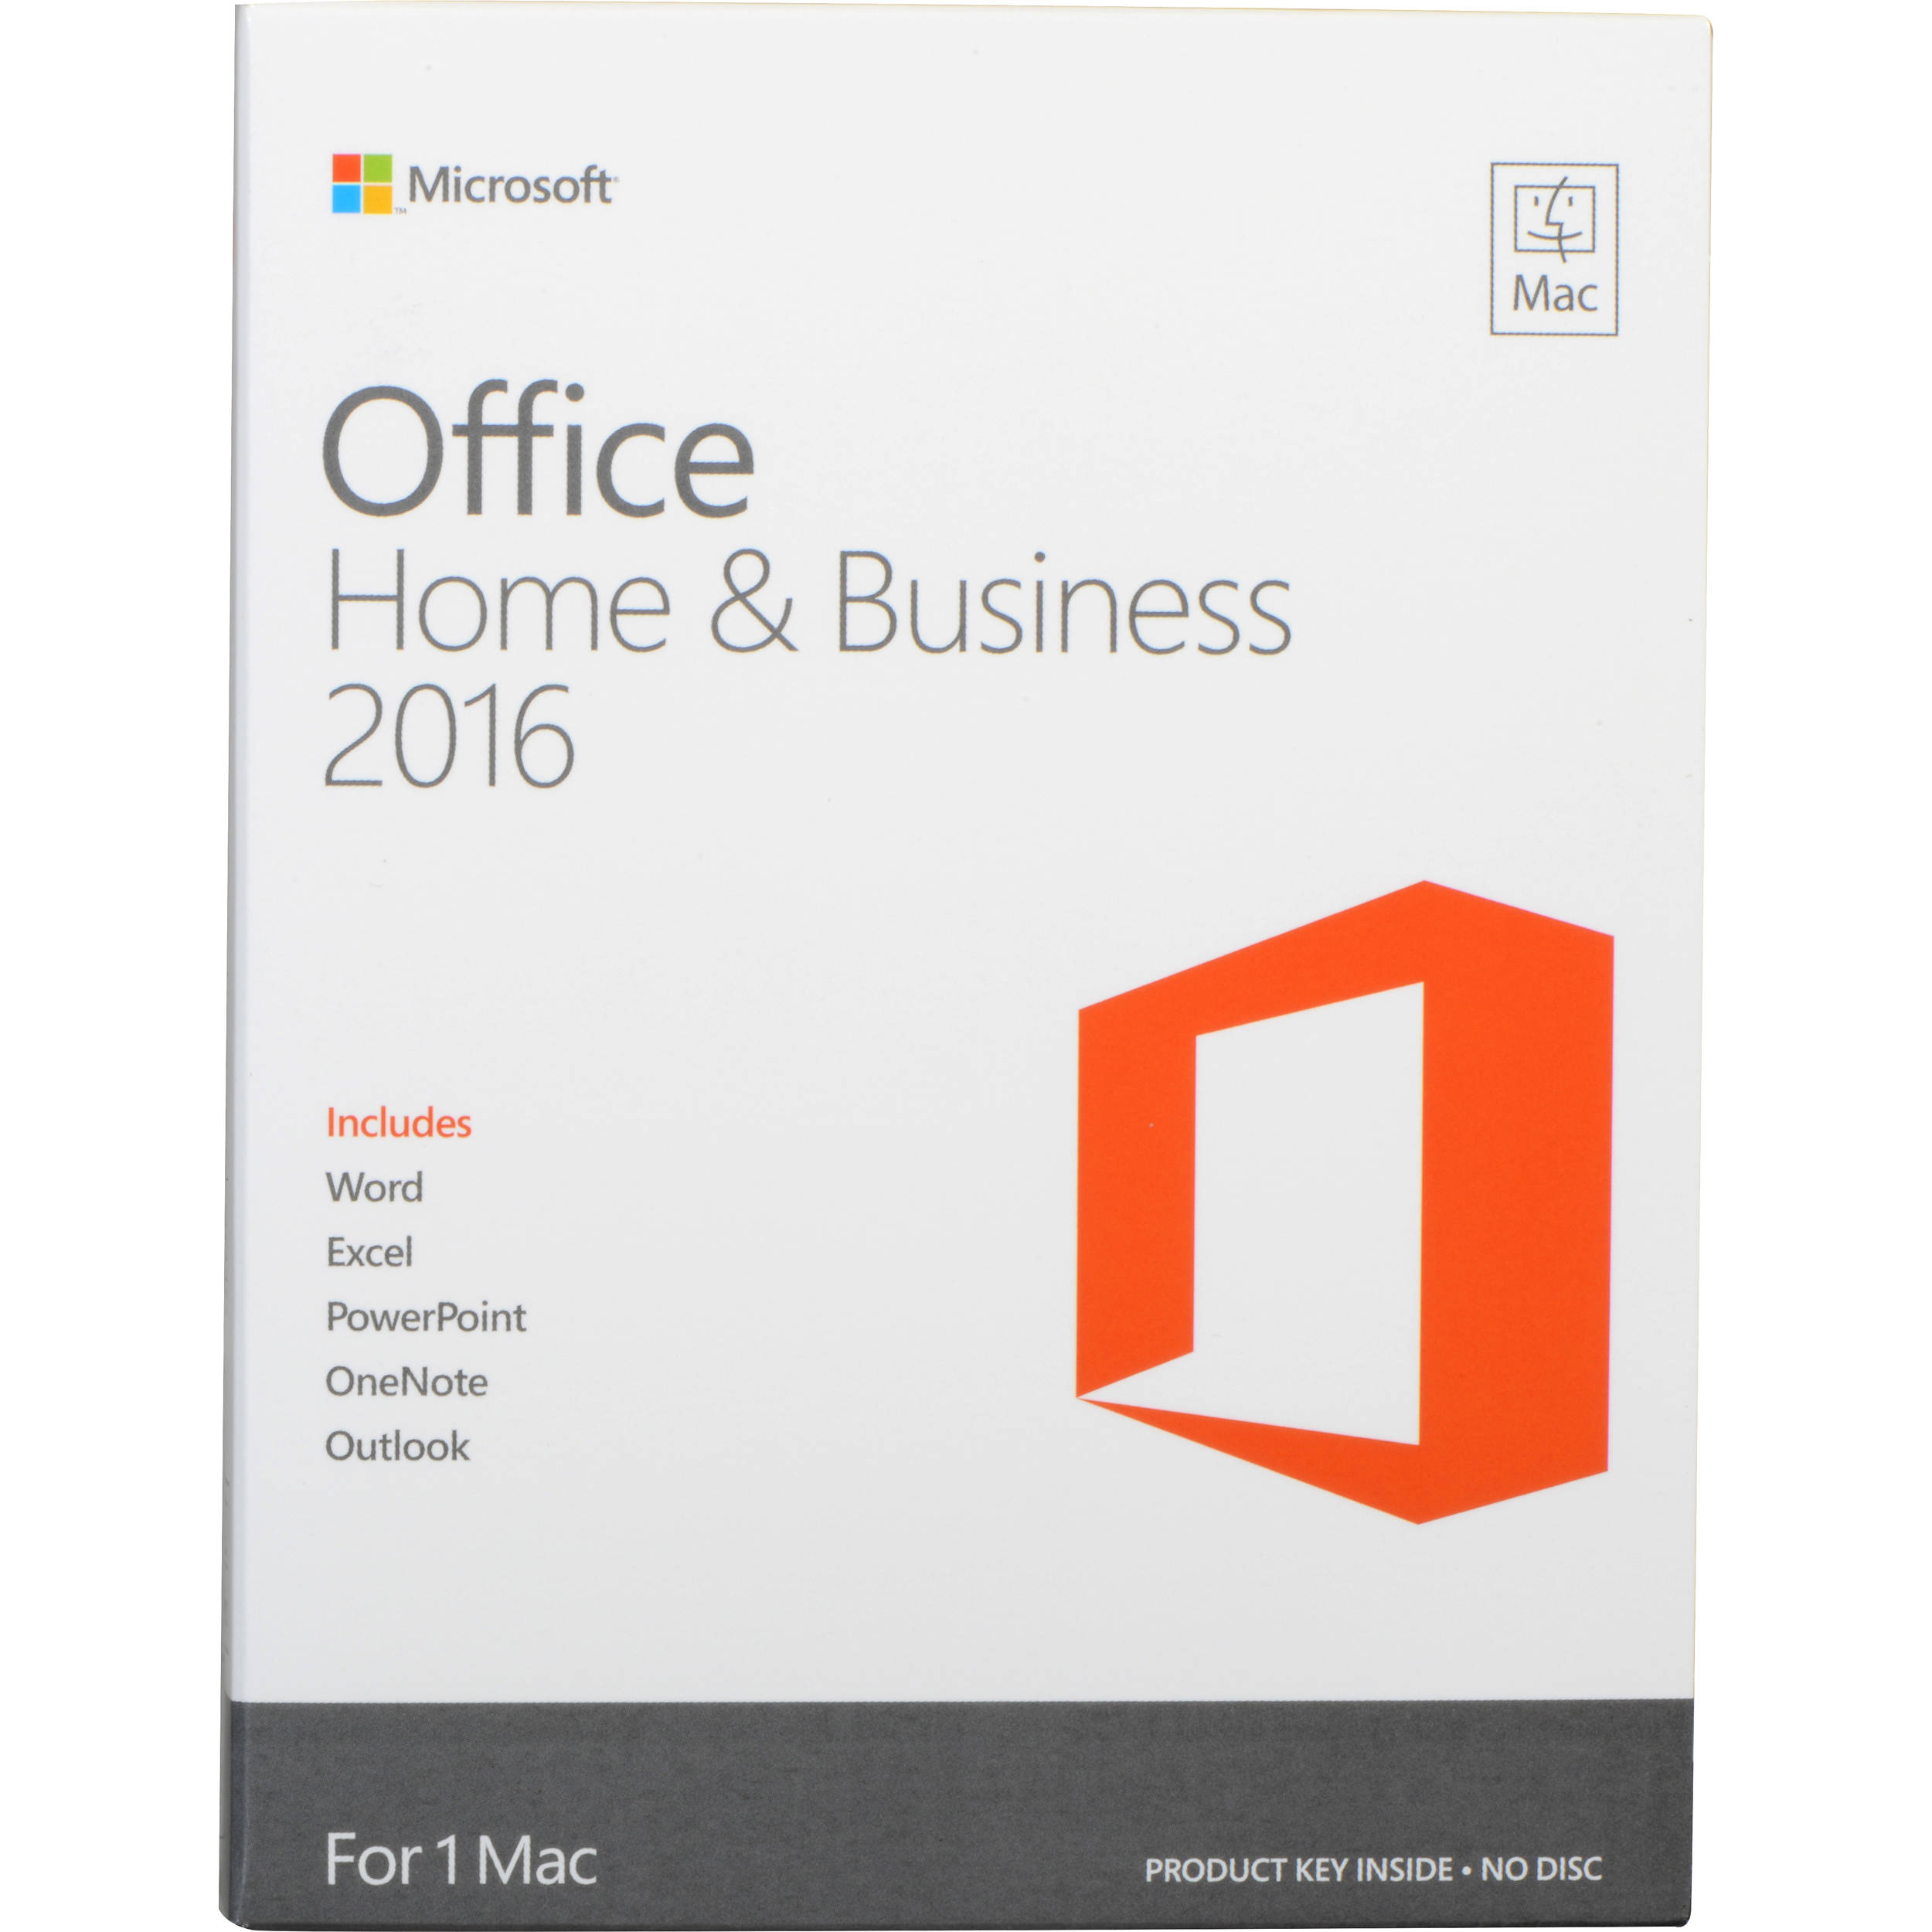 will office for mac 2016 have access database